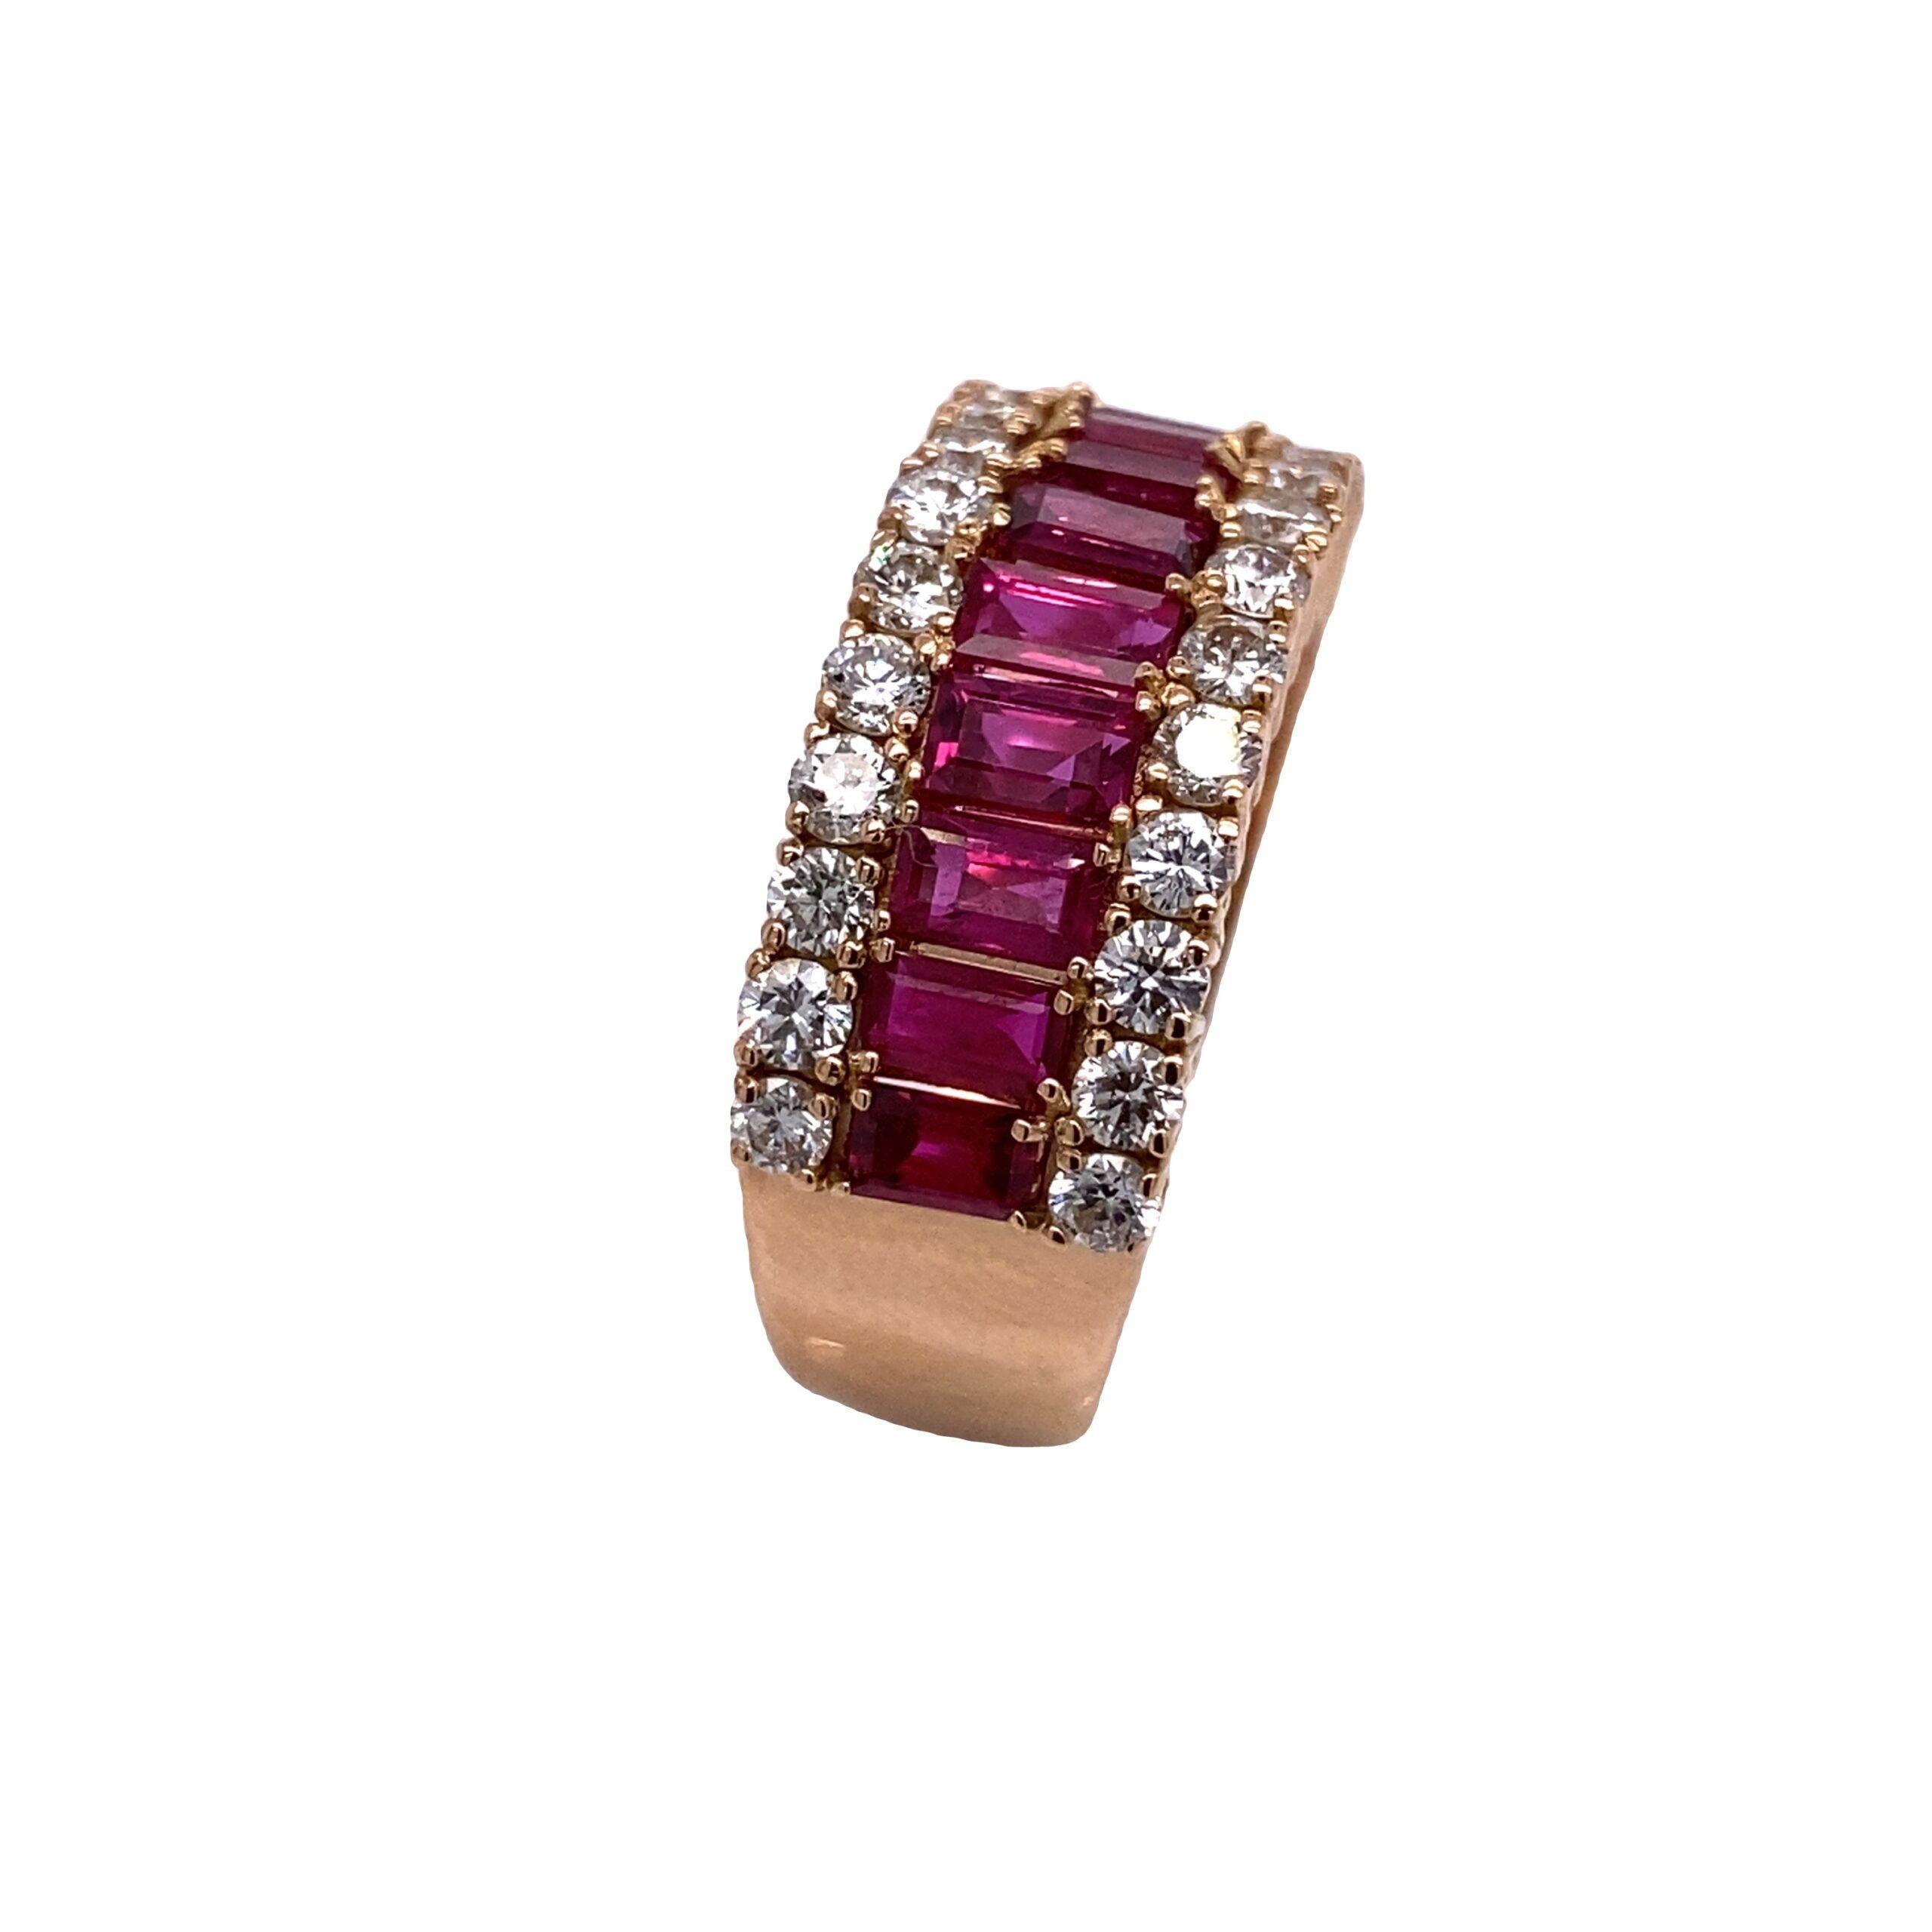 18ct Rose Gold Fine Quality Ruby & Diamond Ring Set with 0.72ct Diamonds

Additional Information:
Total Diamond Weight: 0.72ct Diamond Colour: G
Diamond Clarity: VS2
Total Ruby Weight: 2.50ct Total Weight: 8.5g
Ring Size: M
Width of Band: